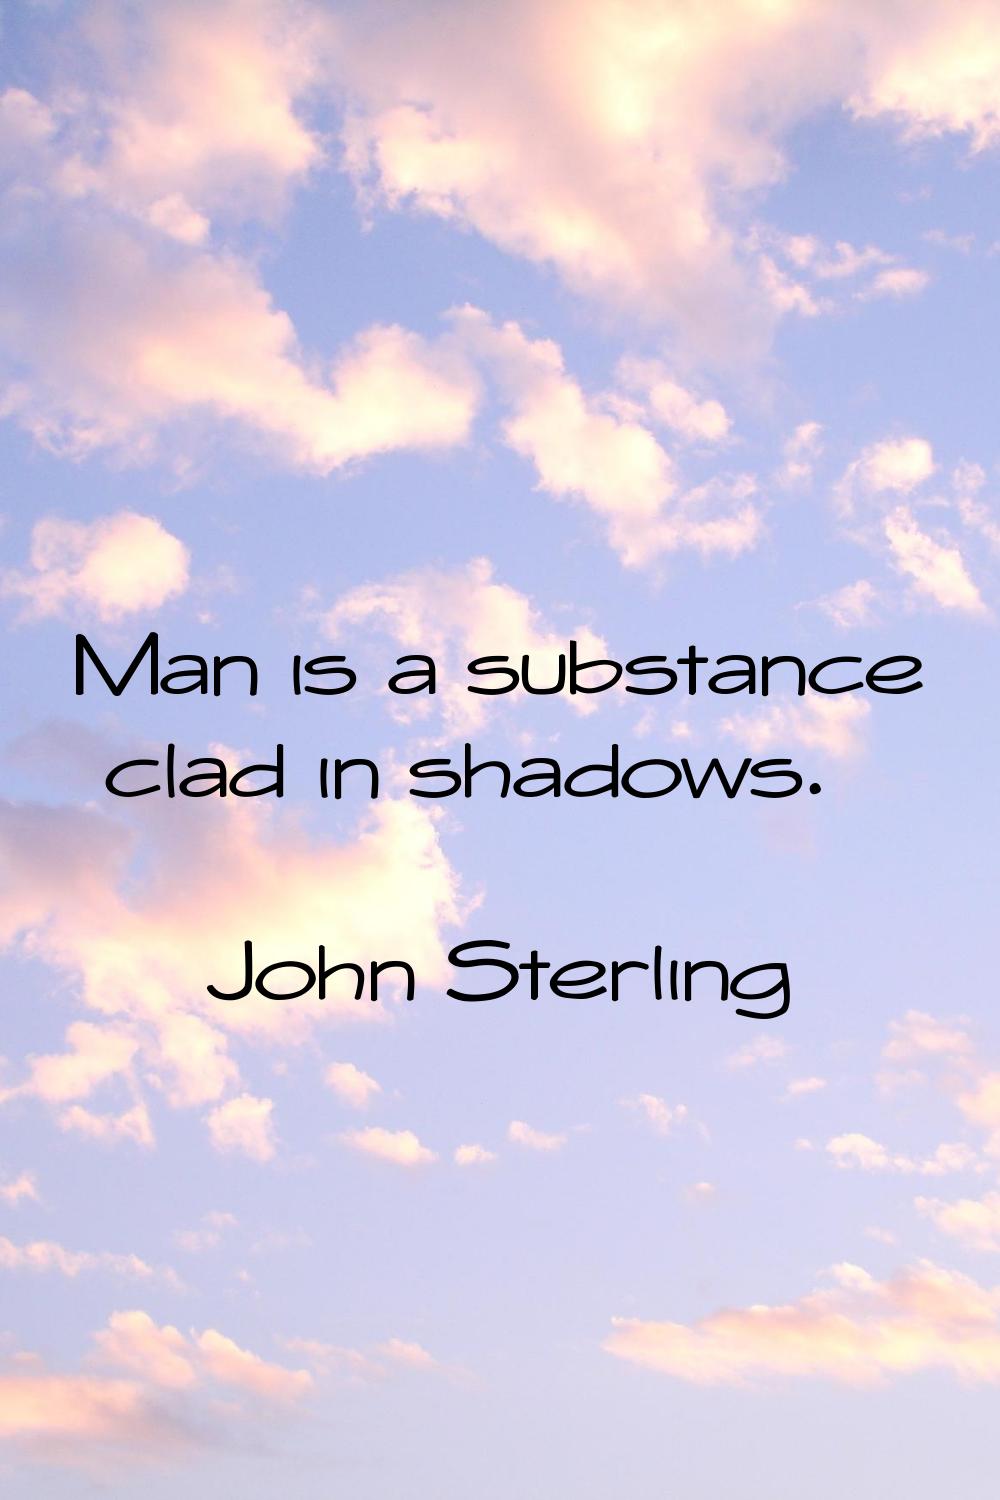 Man is a substance clad in shadows.